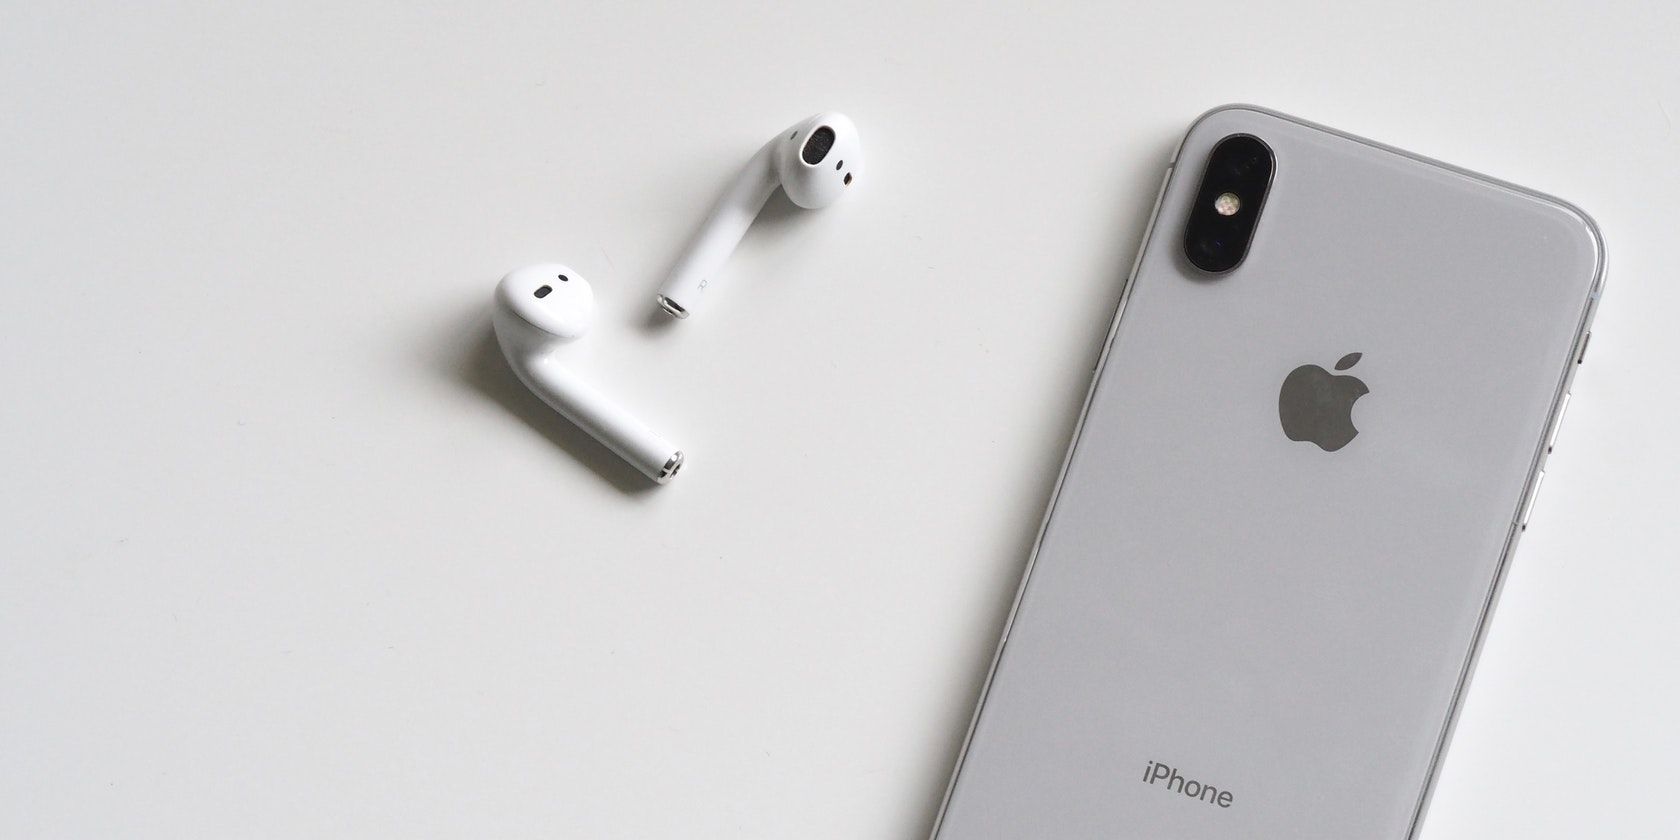 AirPods lying next to an iPhone on a white surface.